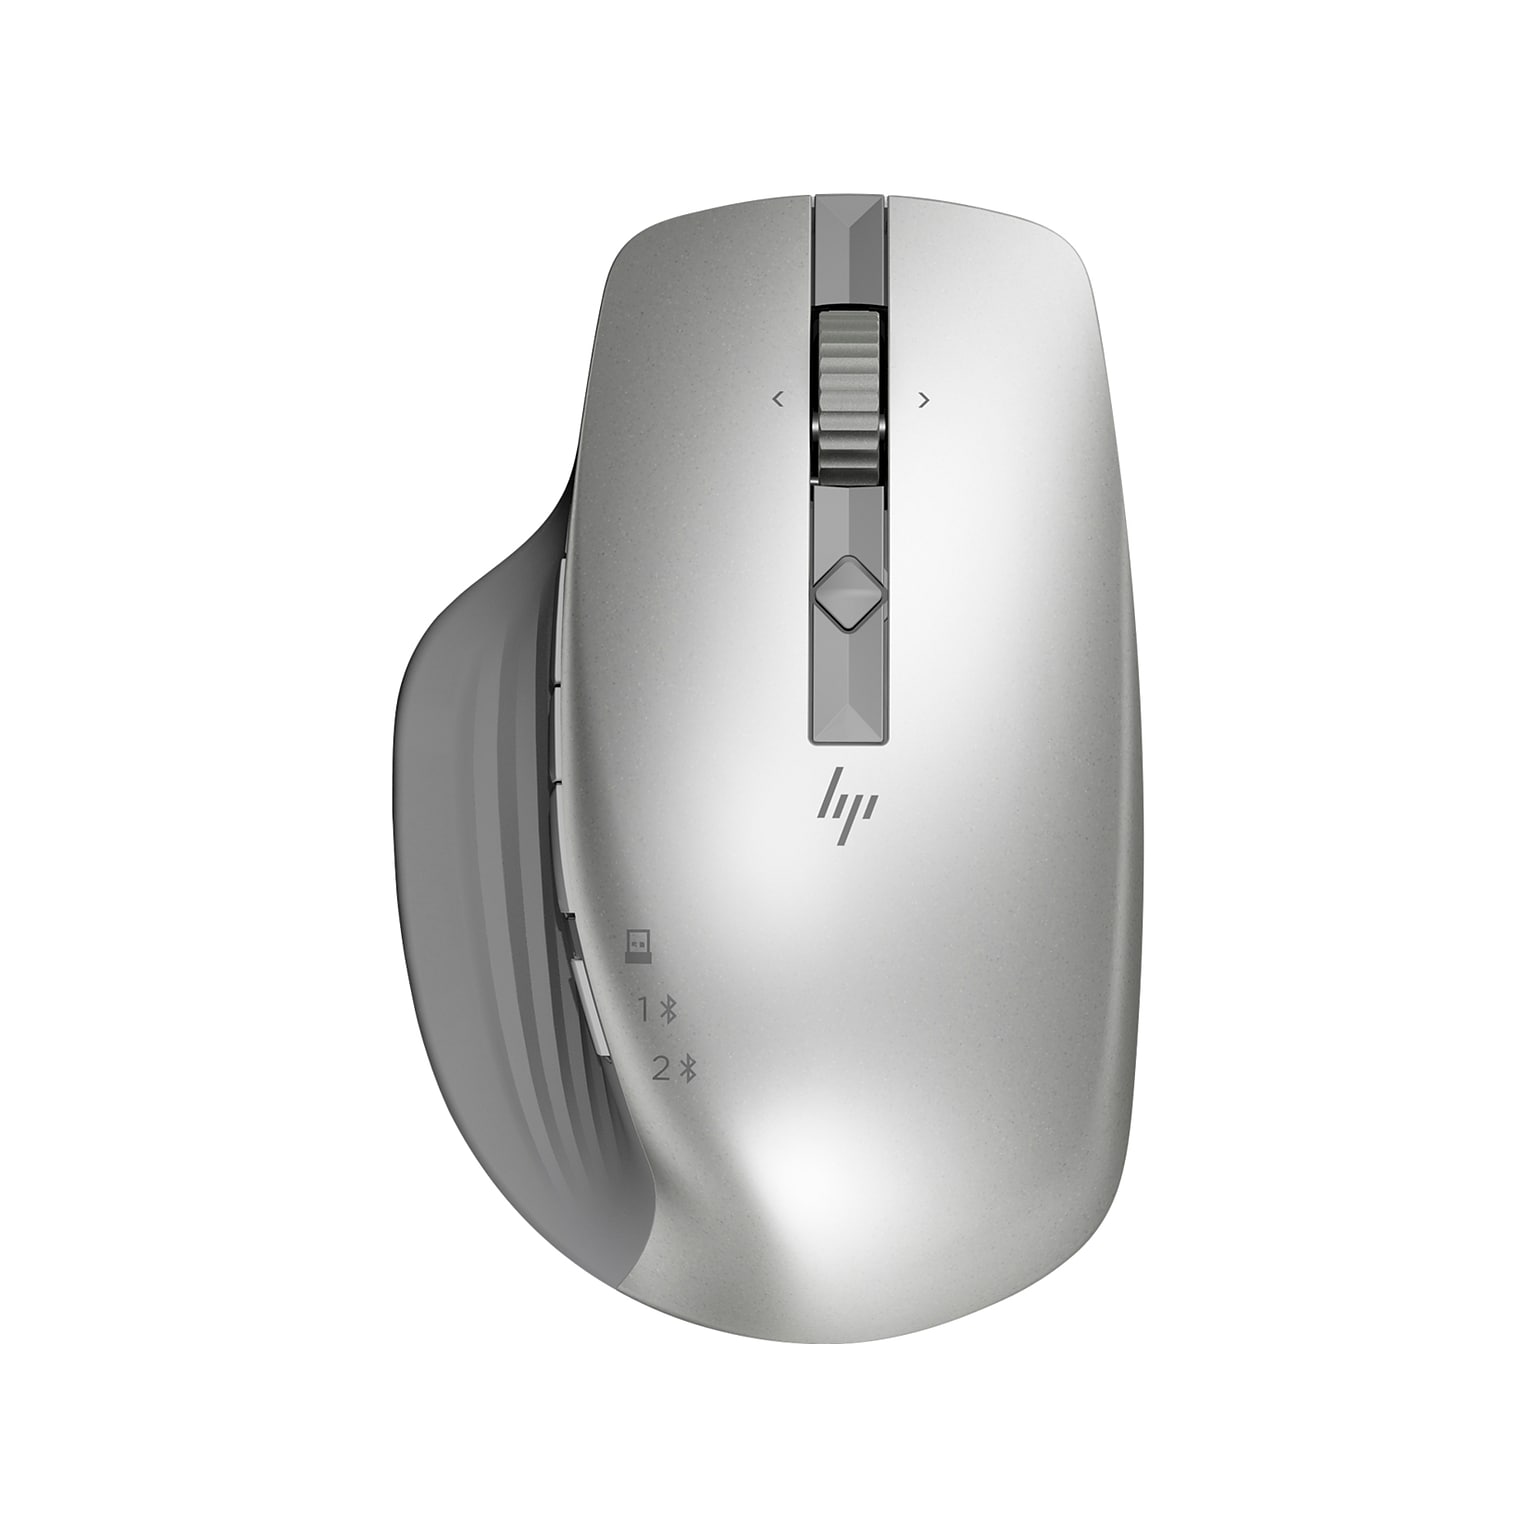 HP 930 Creator Wireless USB Mouse, Silver (1D0K9AA#ABL) | Quill.com